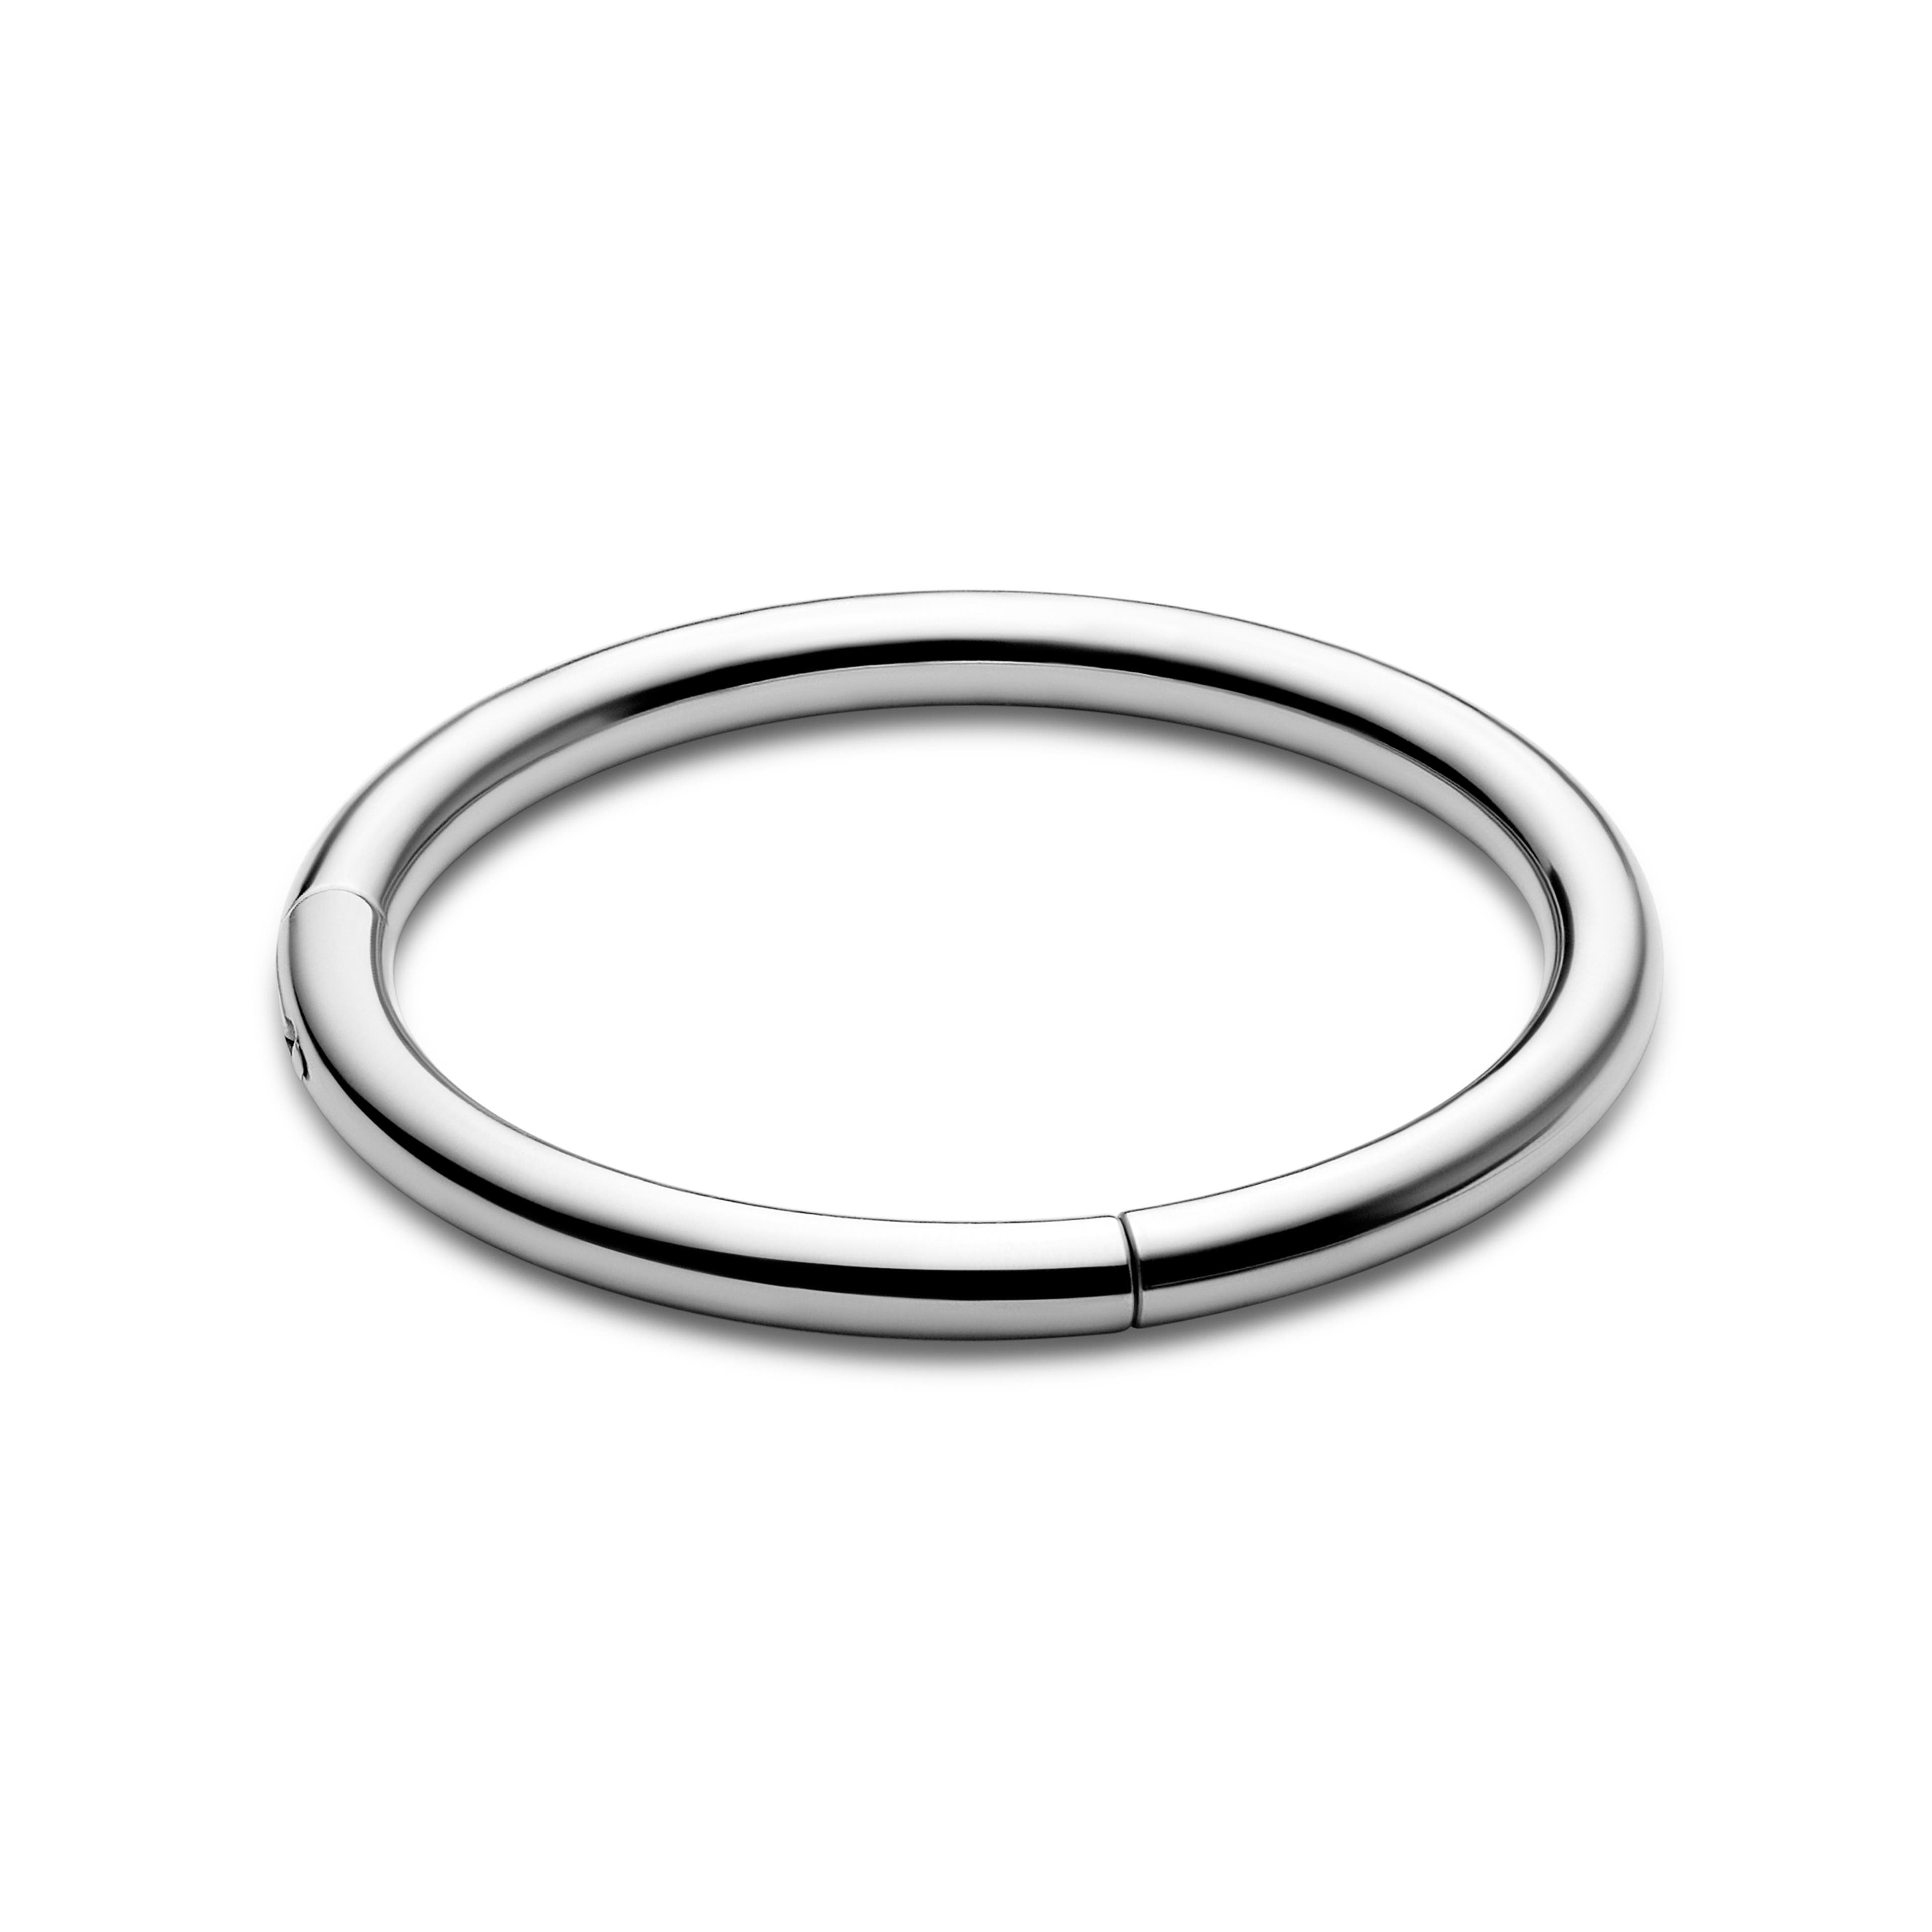 1/4" (7 mm) Silver-tone Surgical Steel Piercing Ring